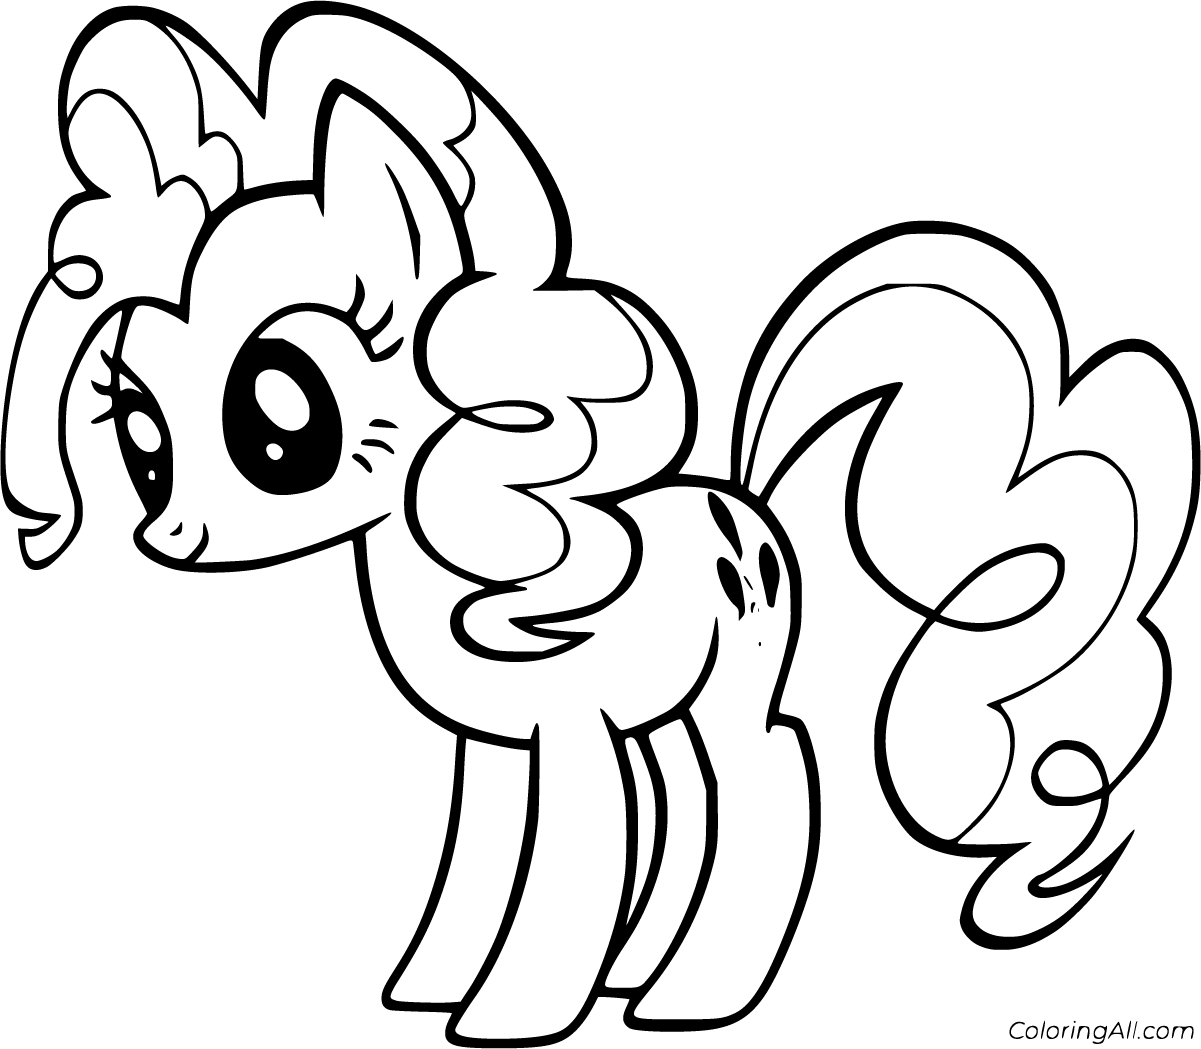 Pinkie Pie Coloring Pages   ColoringAll